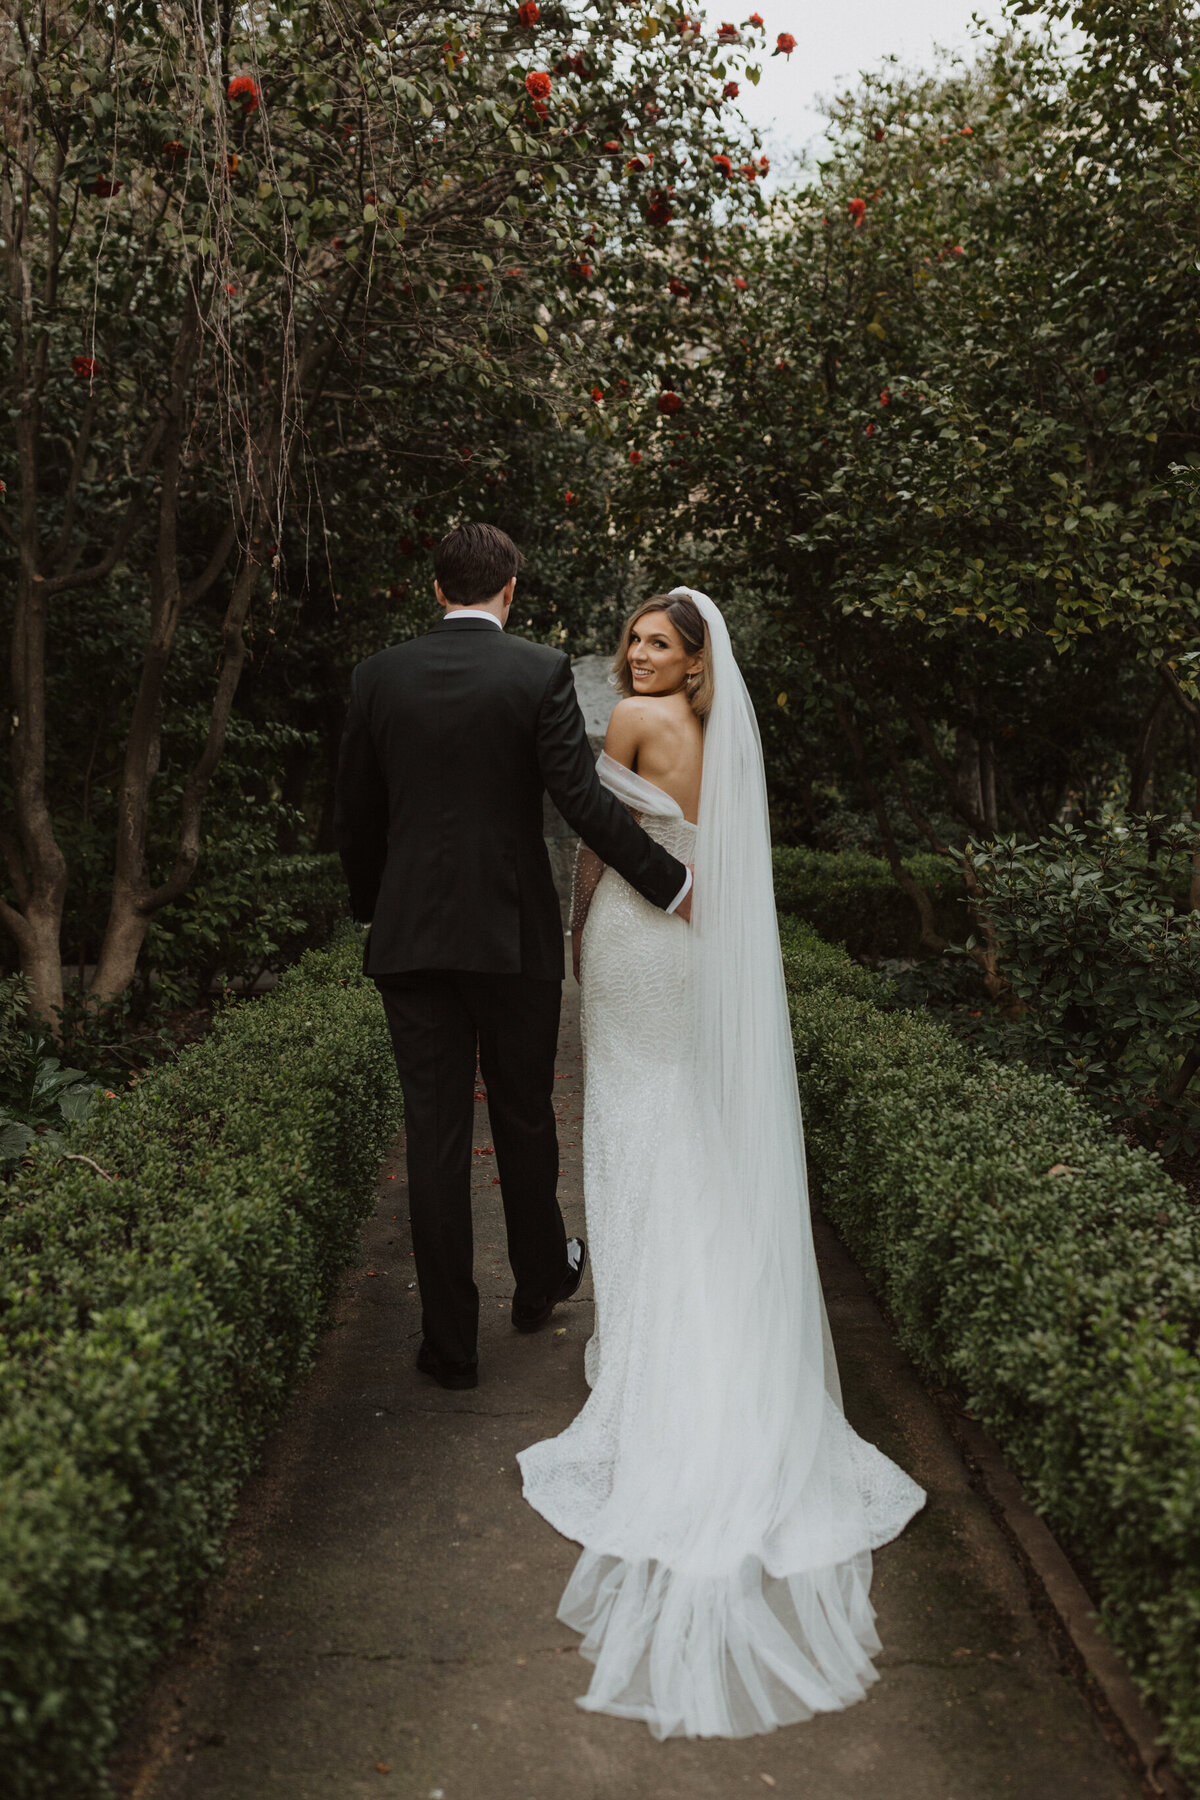 Bride standing with groom in garden pathway while looking back at camera